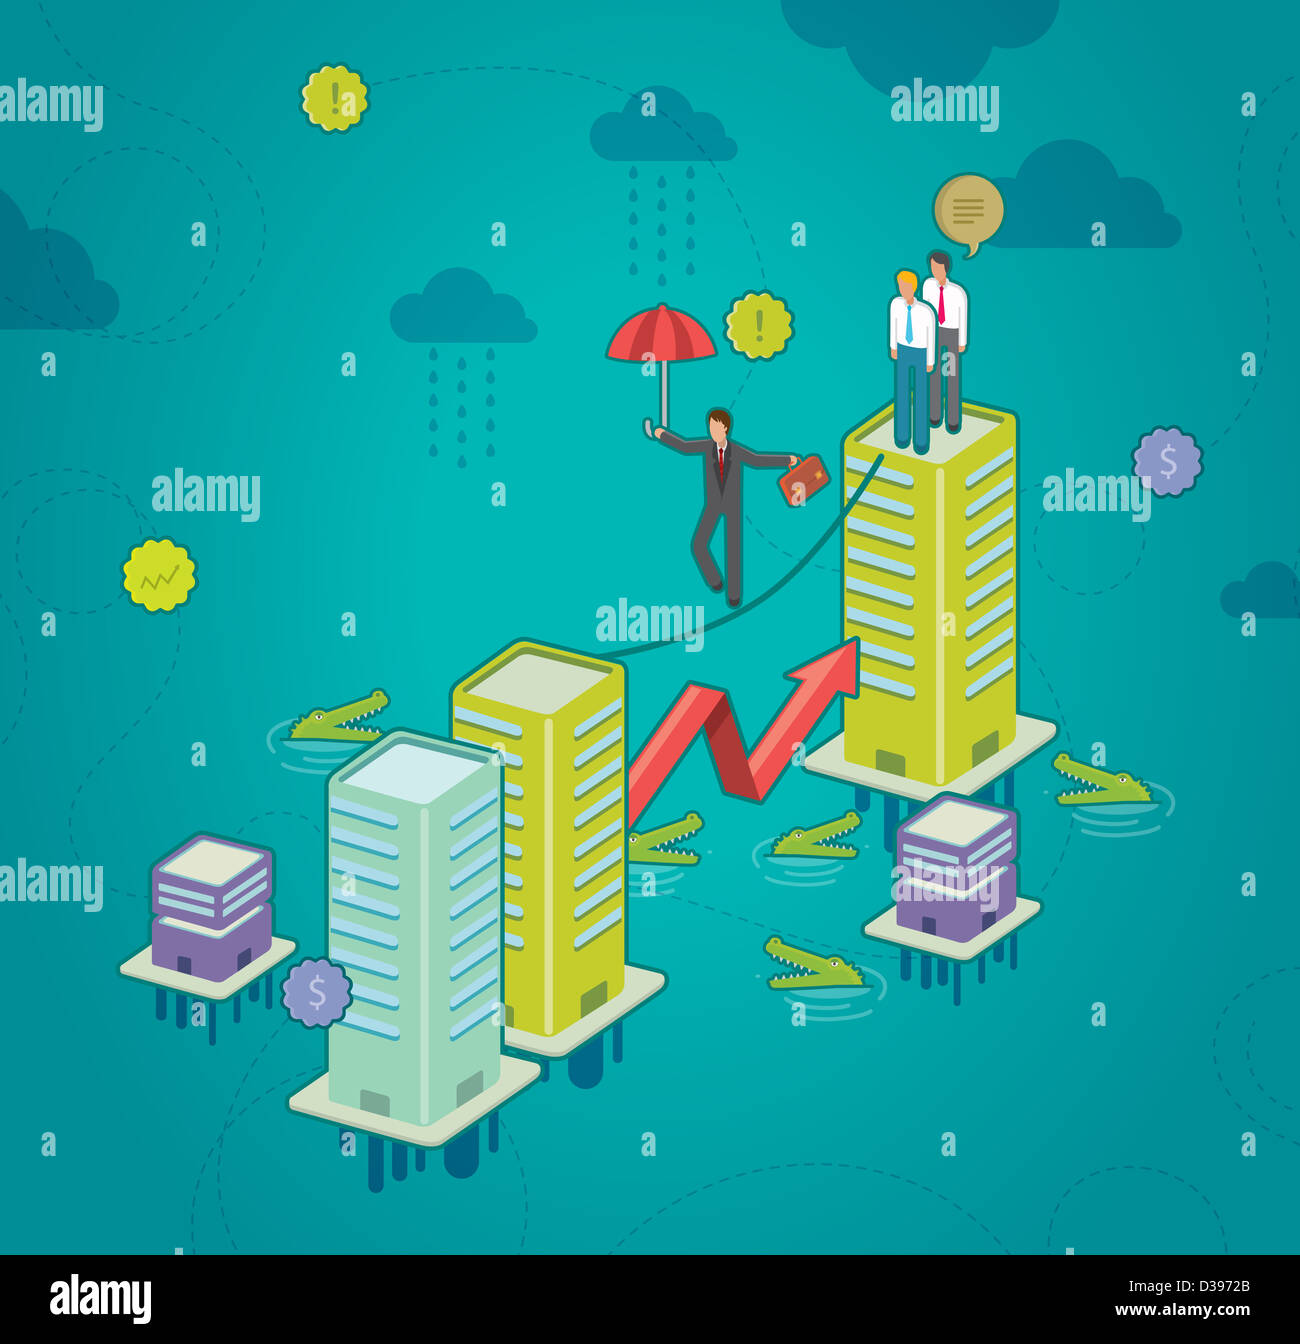 Illustration of businessman on a tightrope holding umbrella with crocodiles in water depicting risk in business Stock Photo